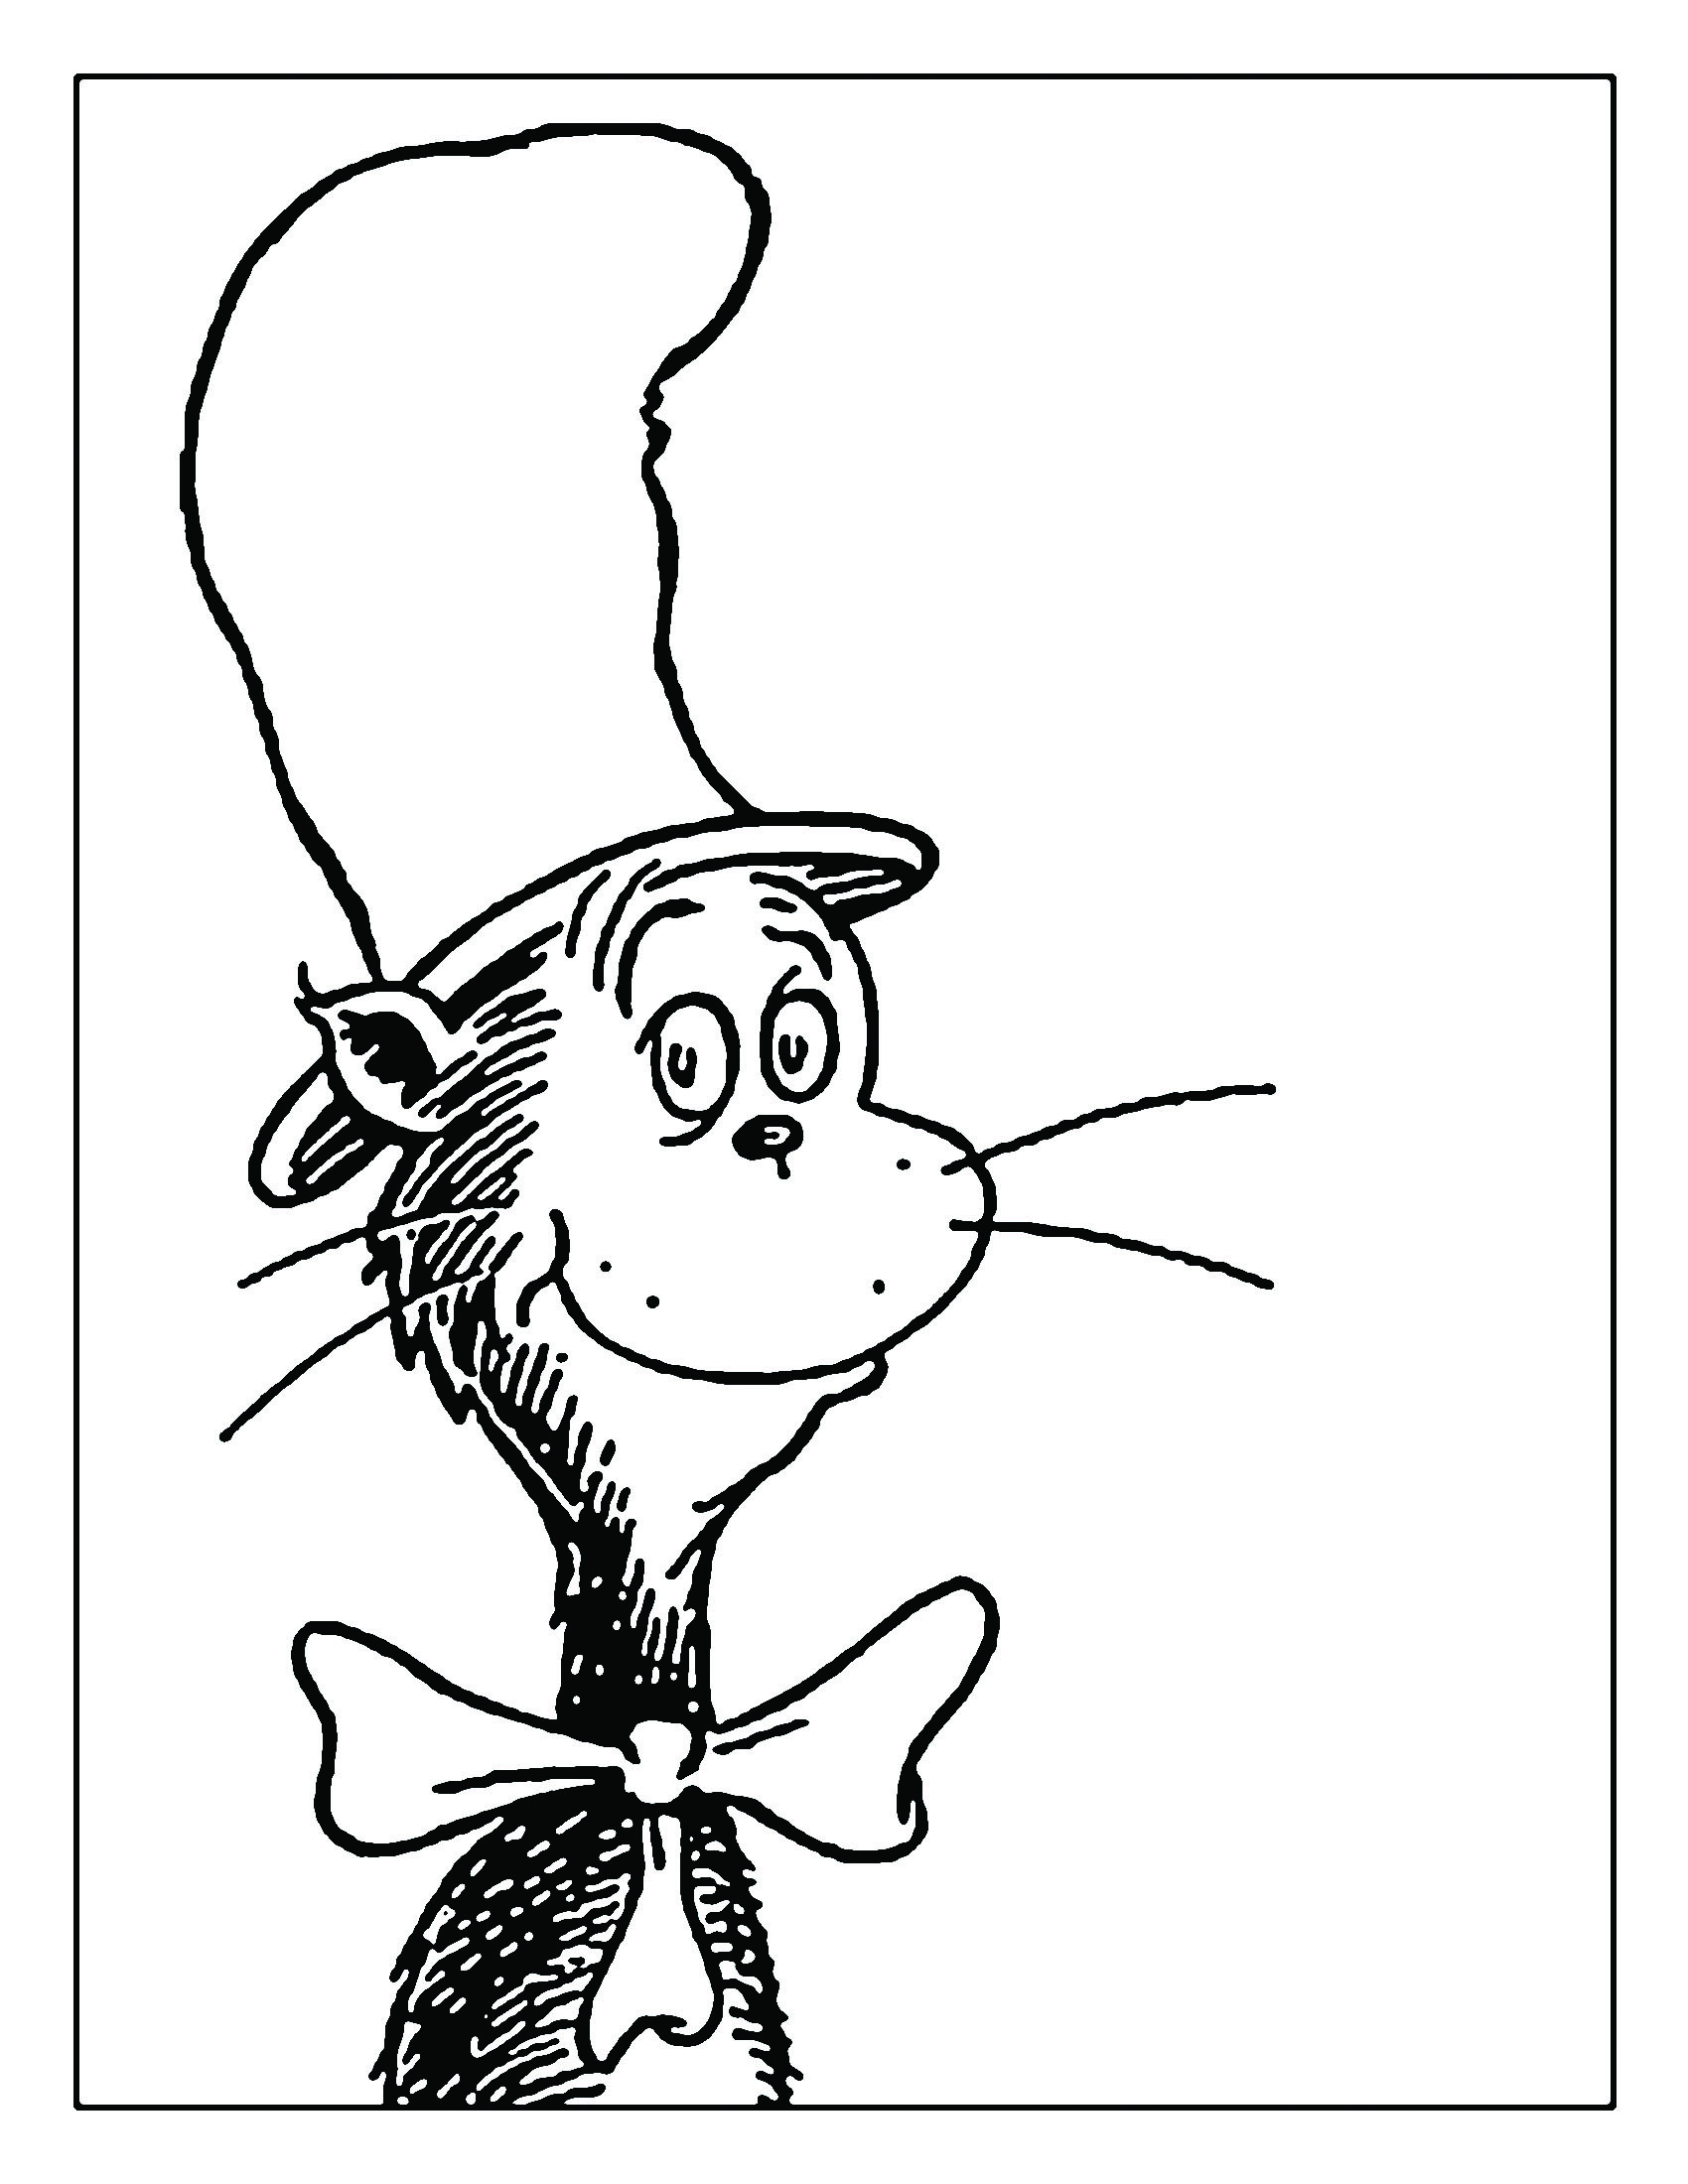 Free Cat In The Hat Images Black And White, Download Free Cat In With Blank Cat In The Hat Template